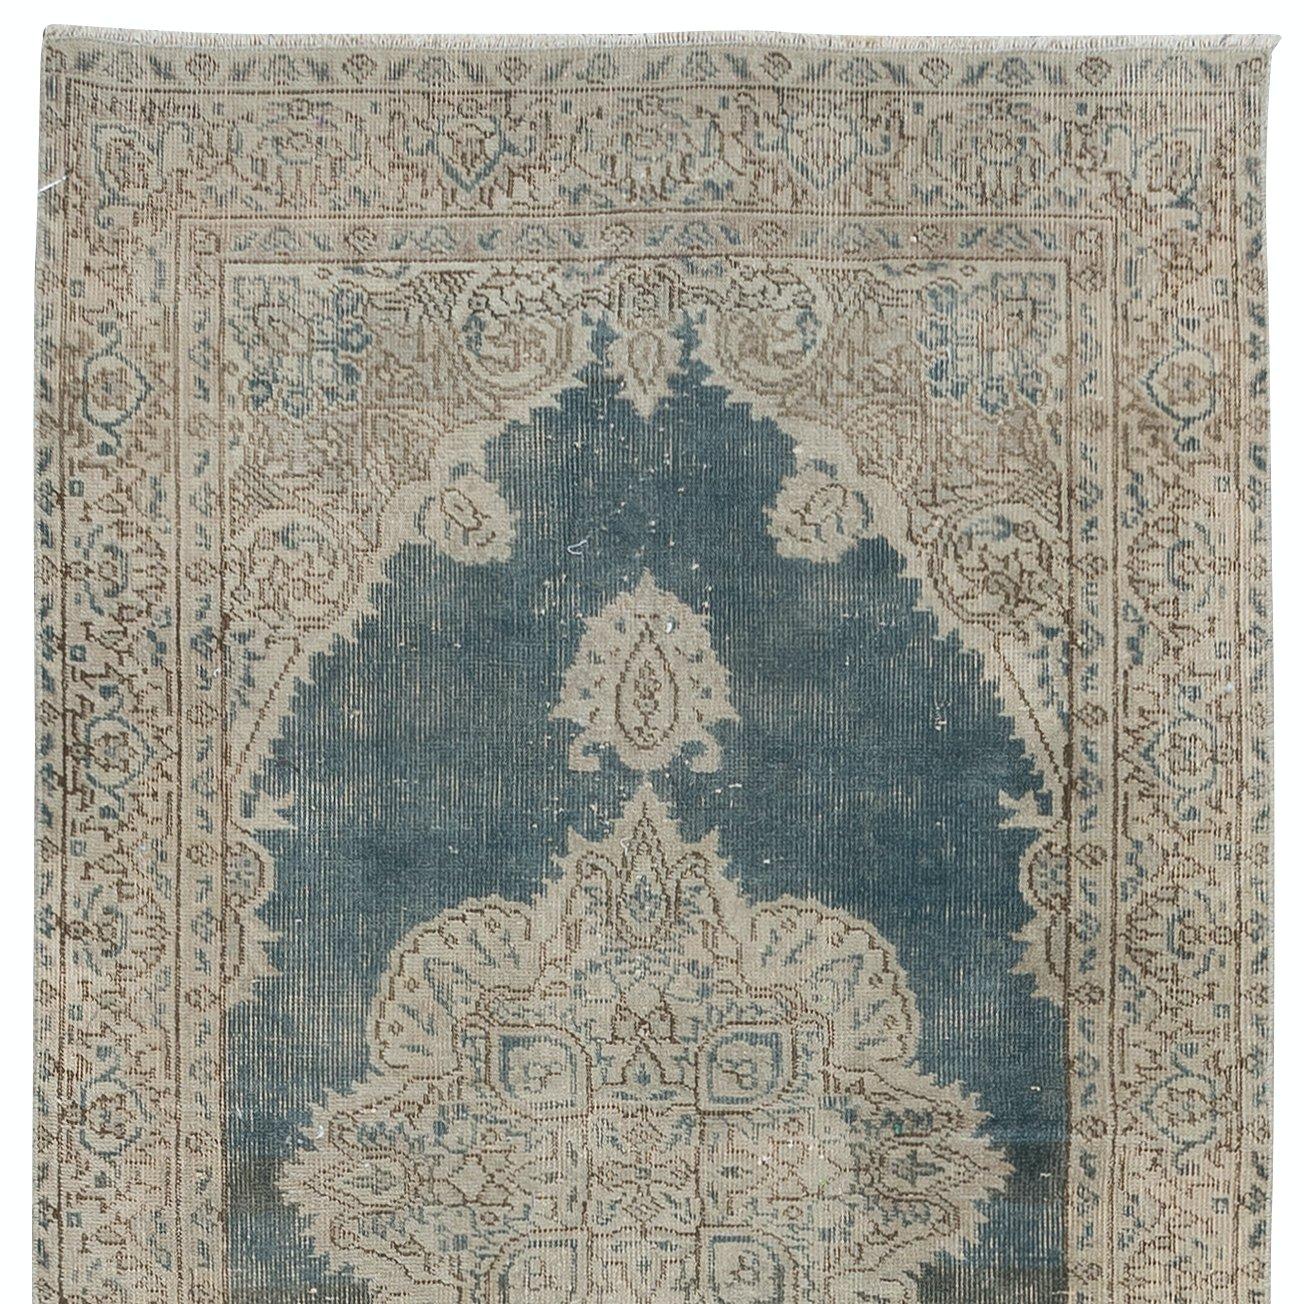 Hand-Knotted 3.3x10.7 Ft Faded Anatolian Oushak Hallway Runner Rug, Vintage Corridor Carpet For Sale